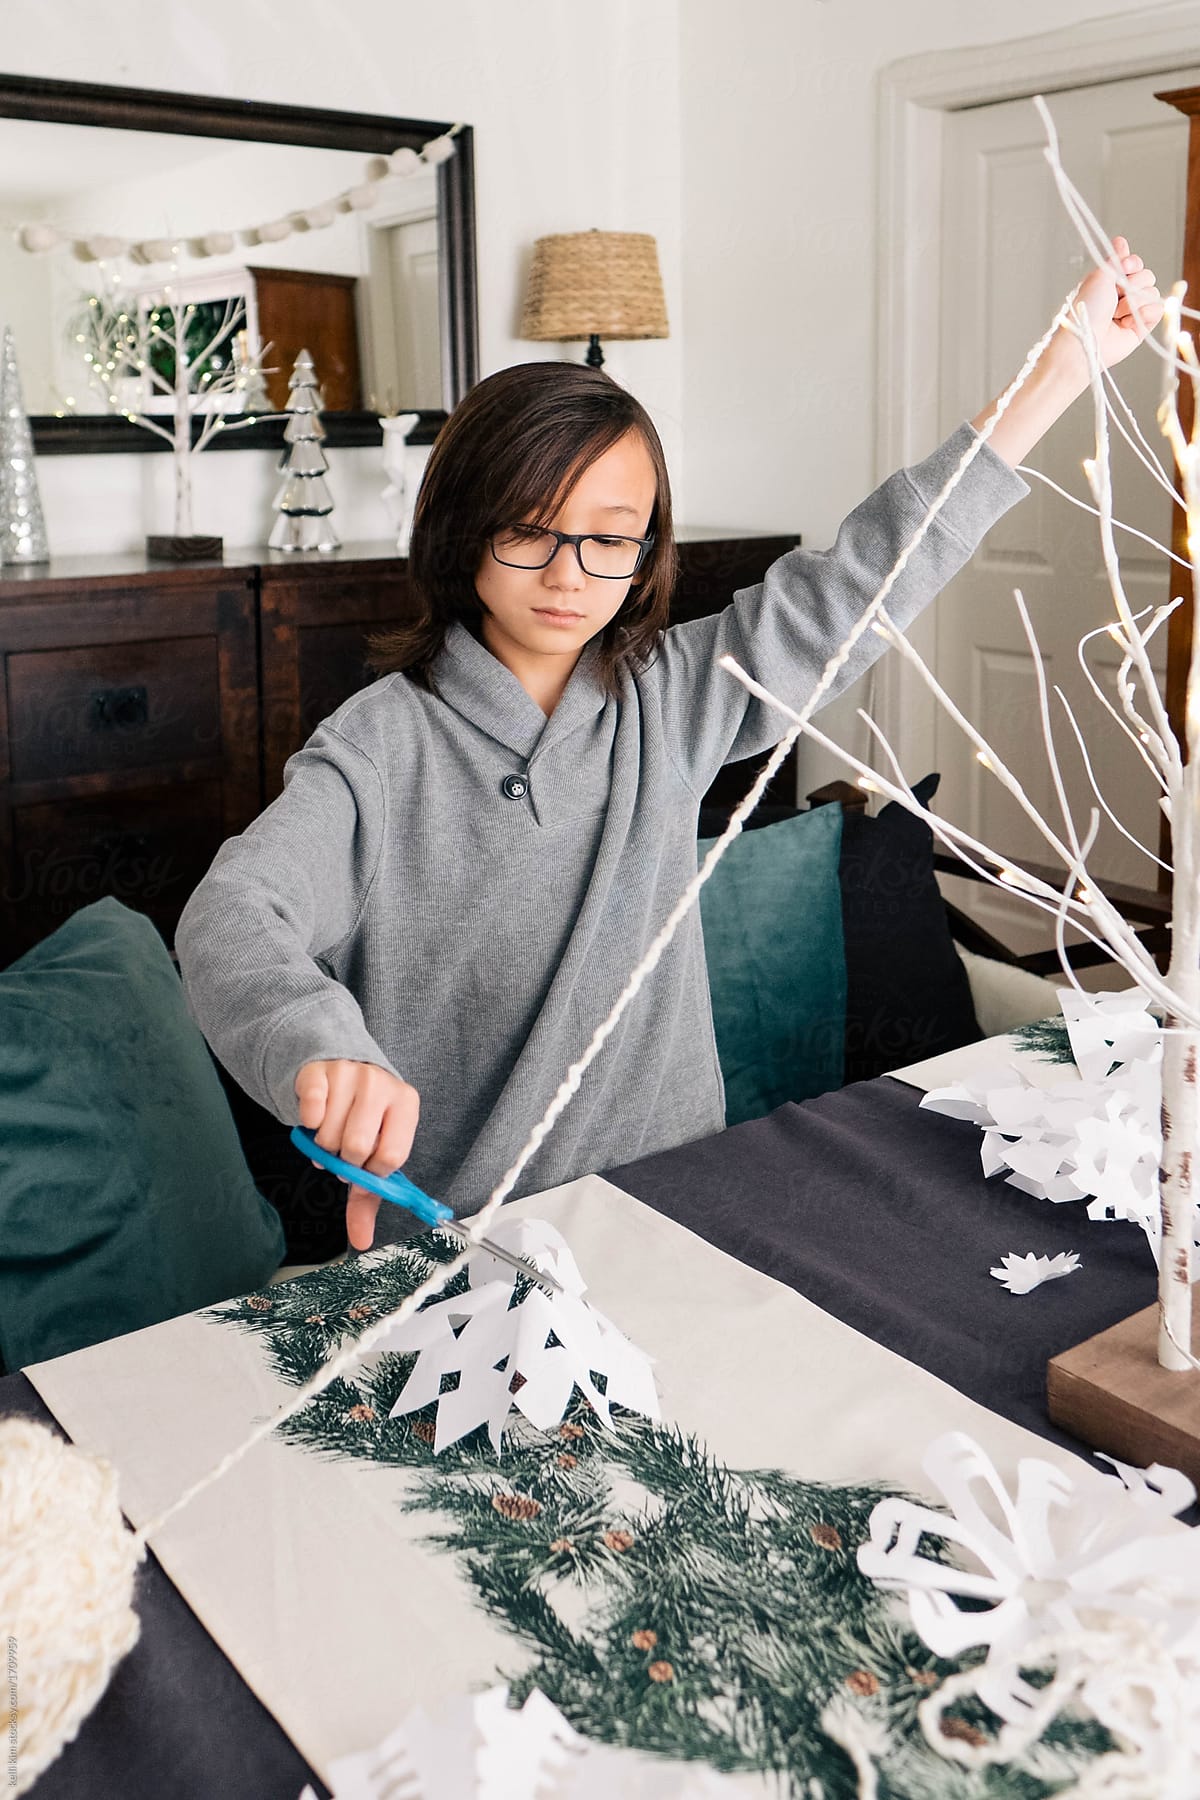 Young boy makes paper snowflakes